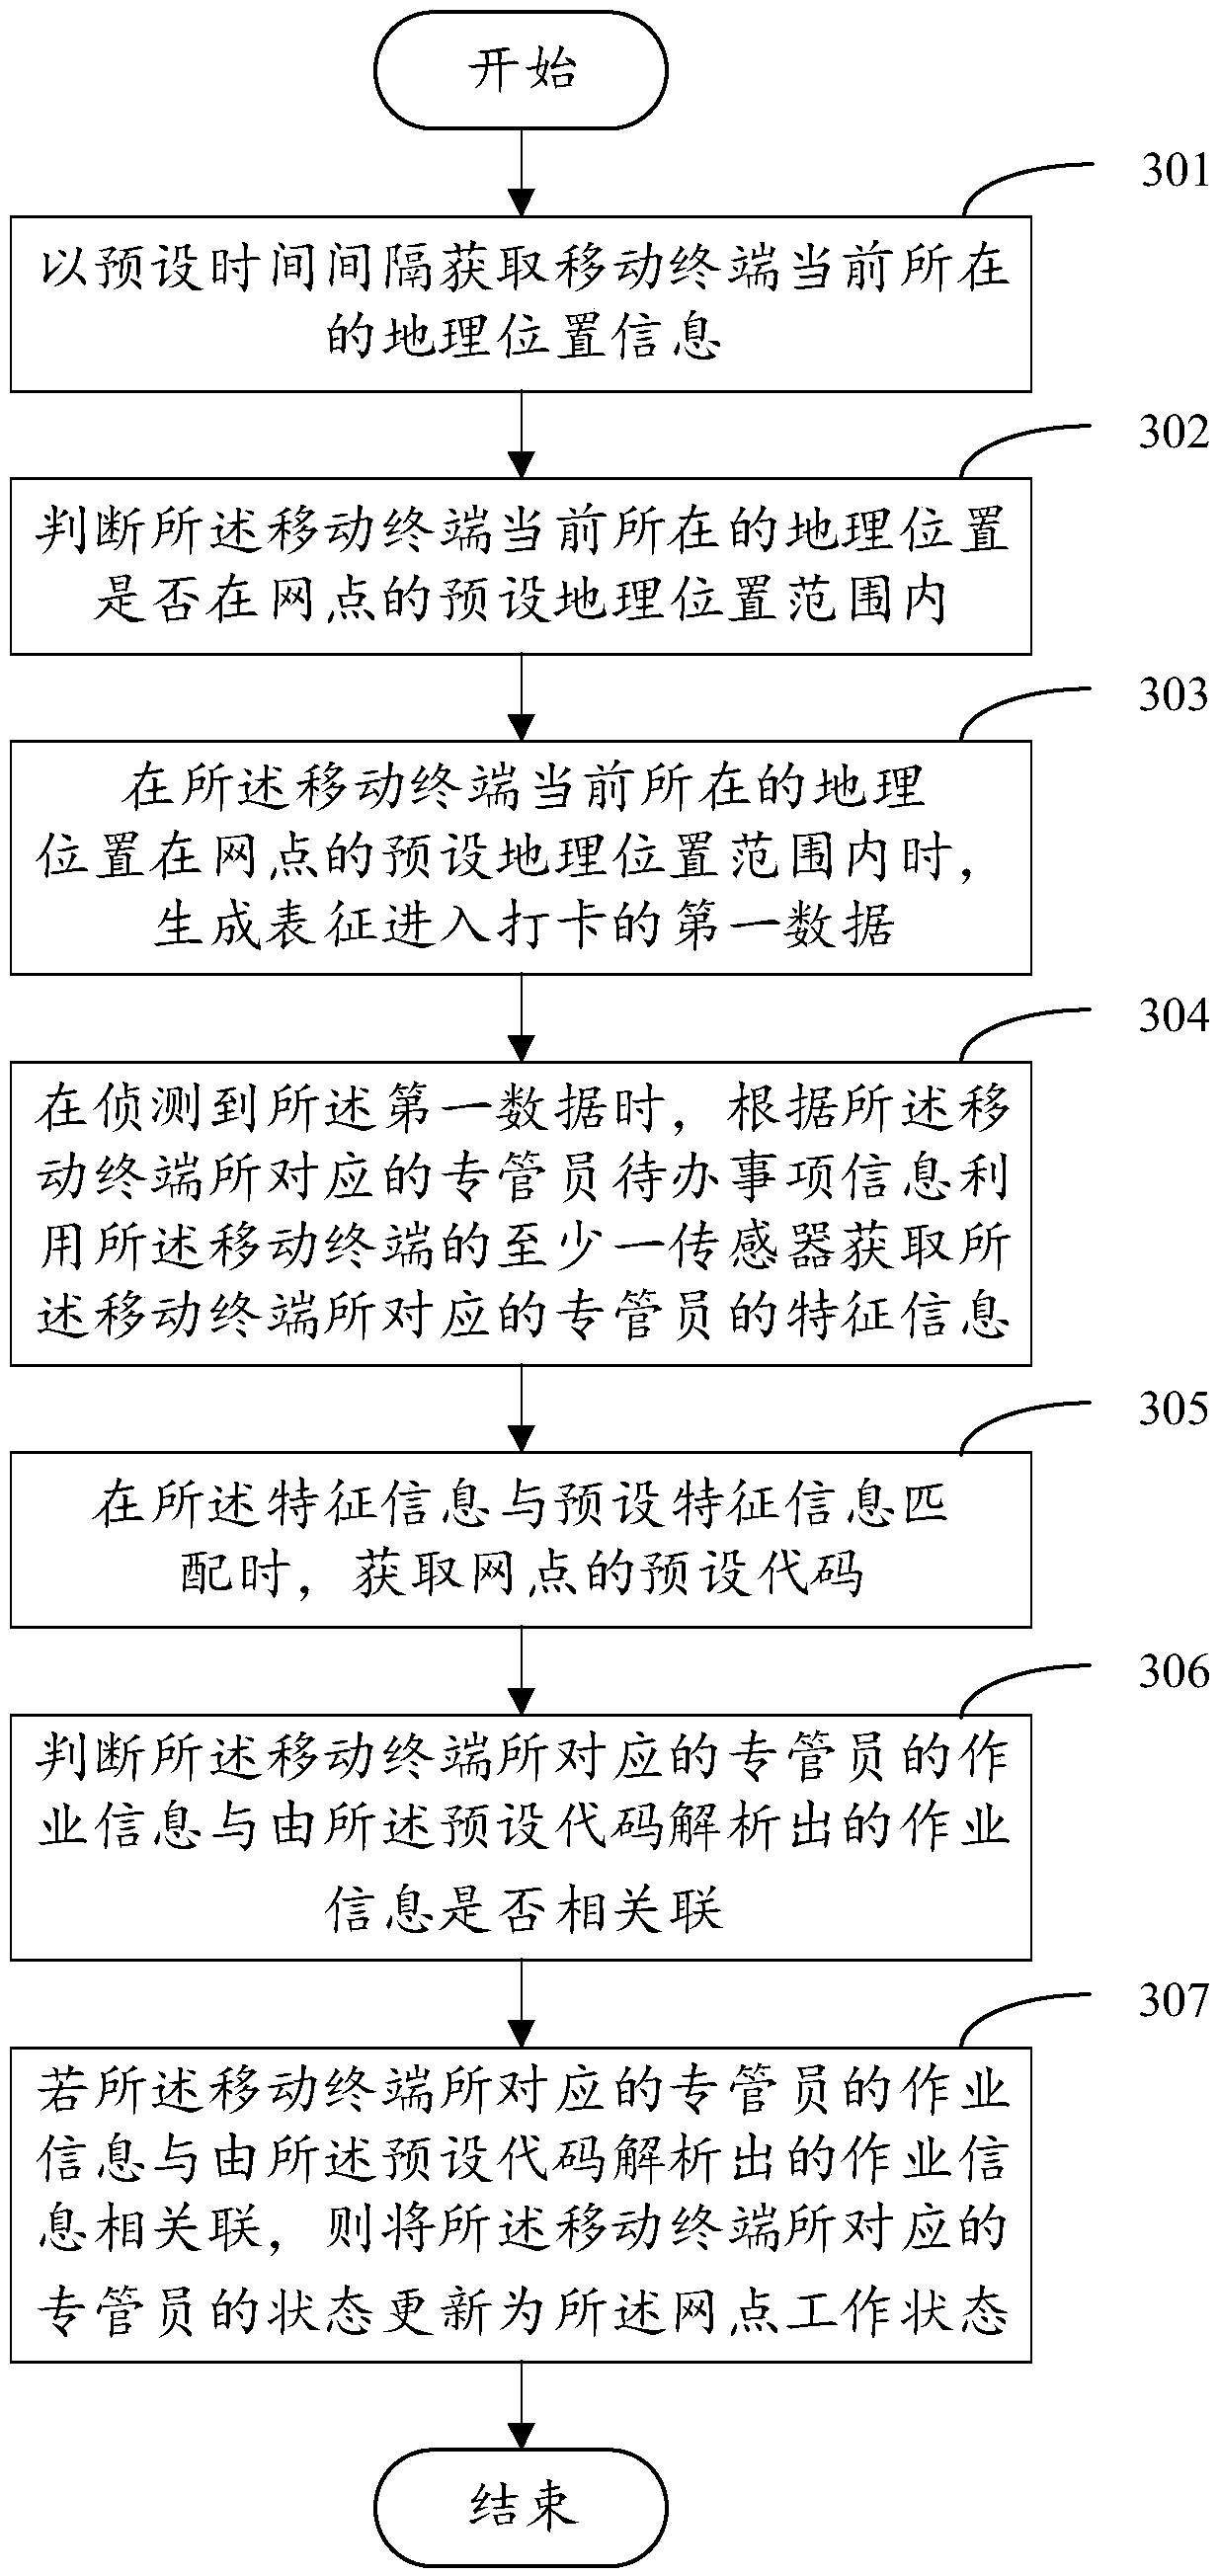 System control method and device, computer device, and computer-readable storage medium